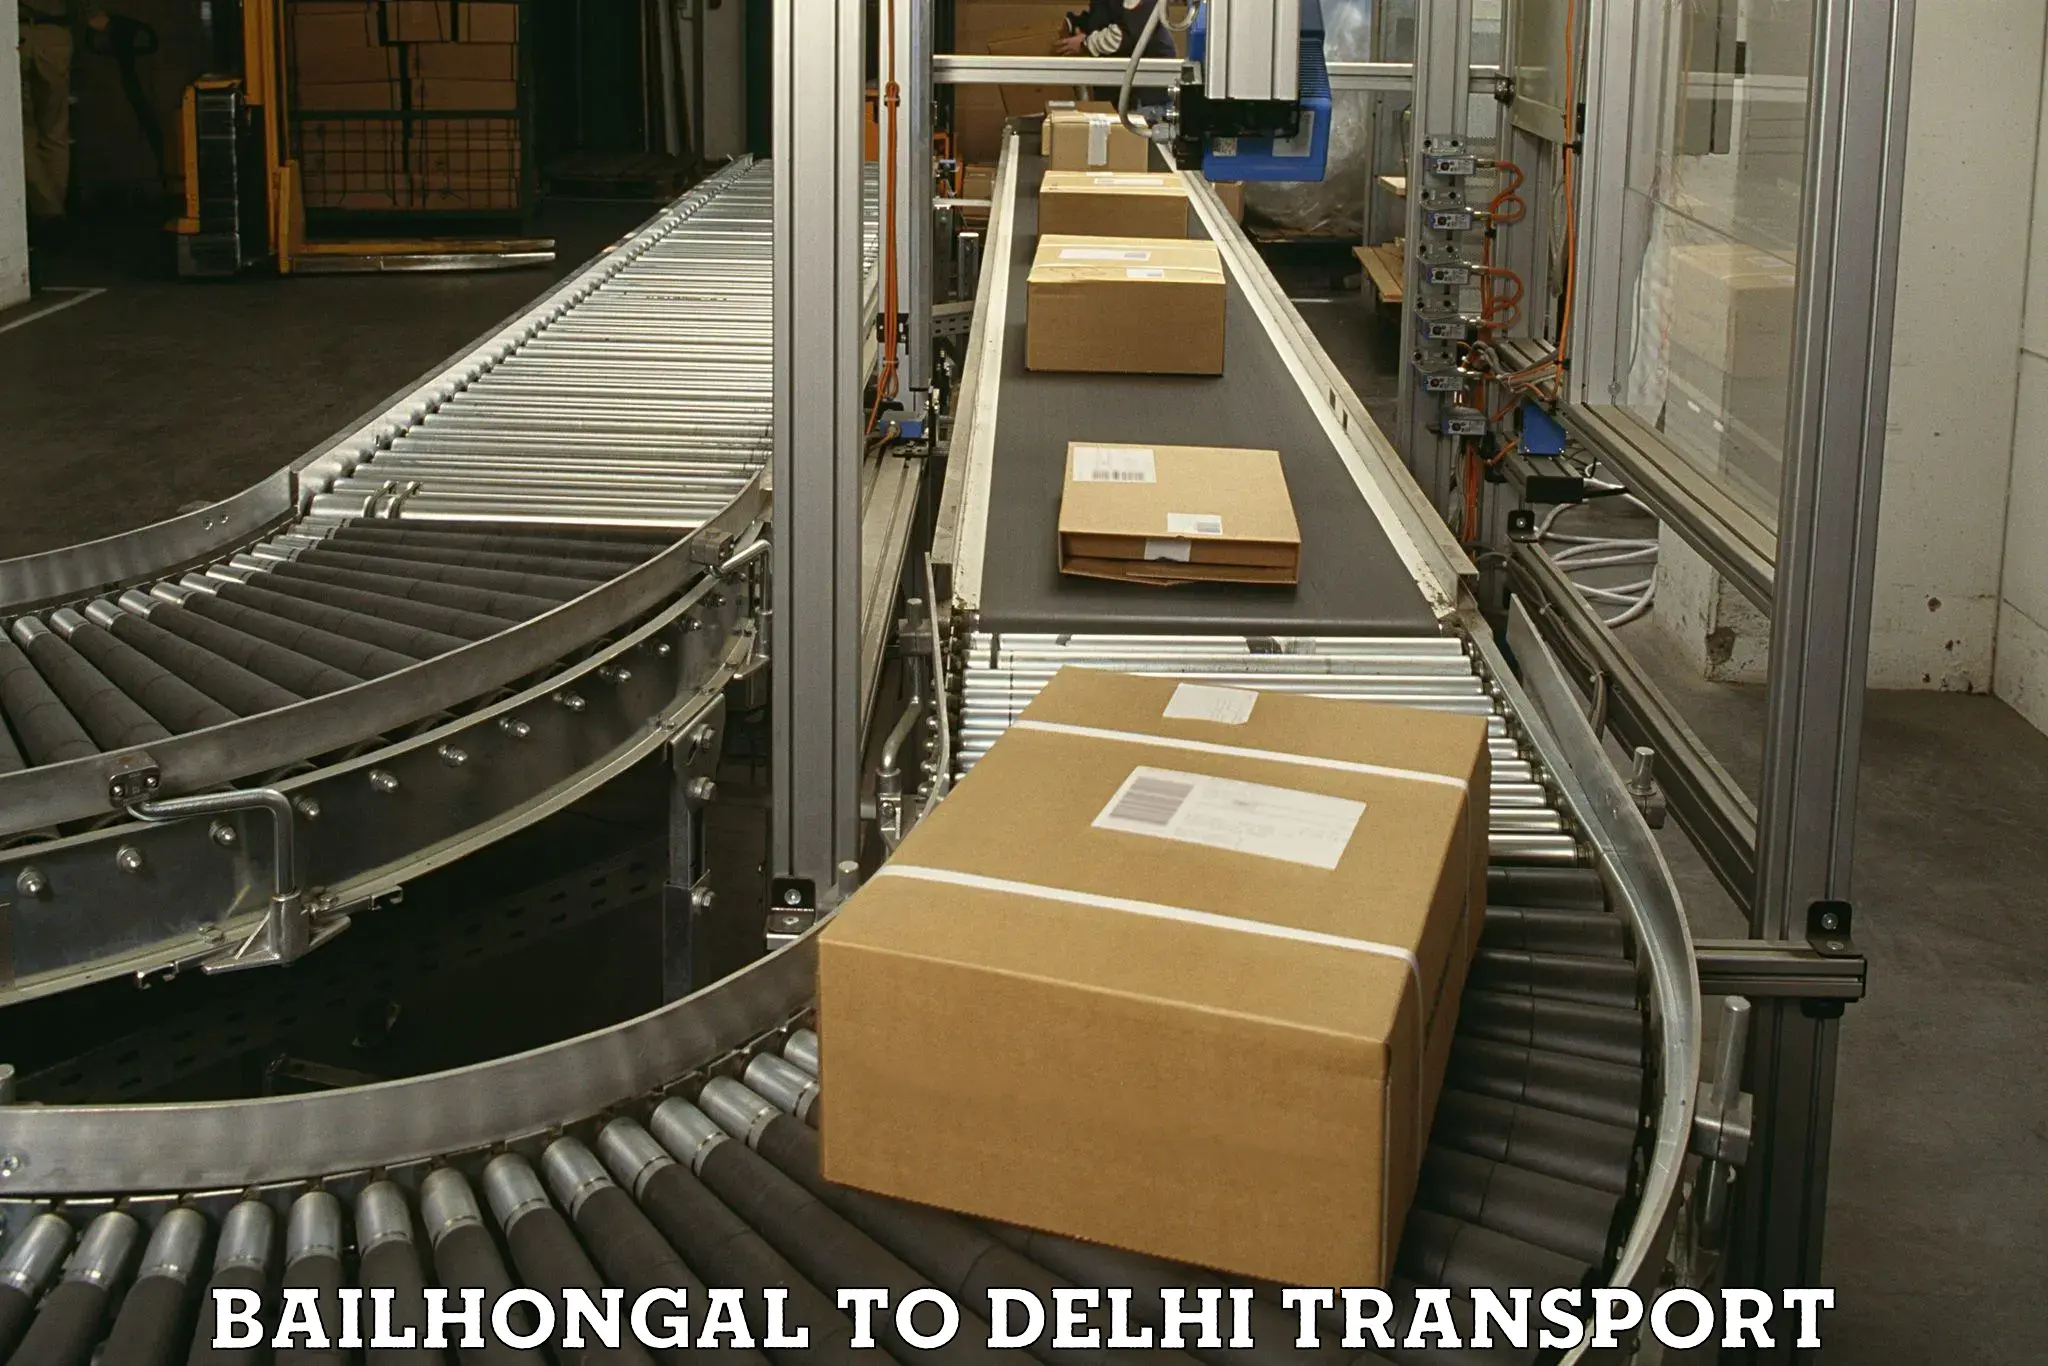 Road transport online services Bailhongal to NCR